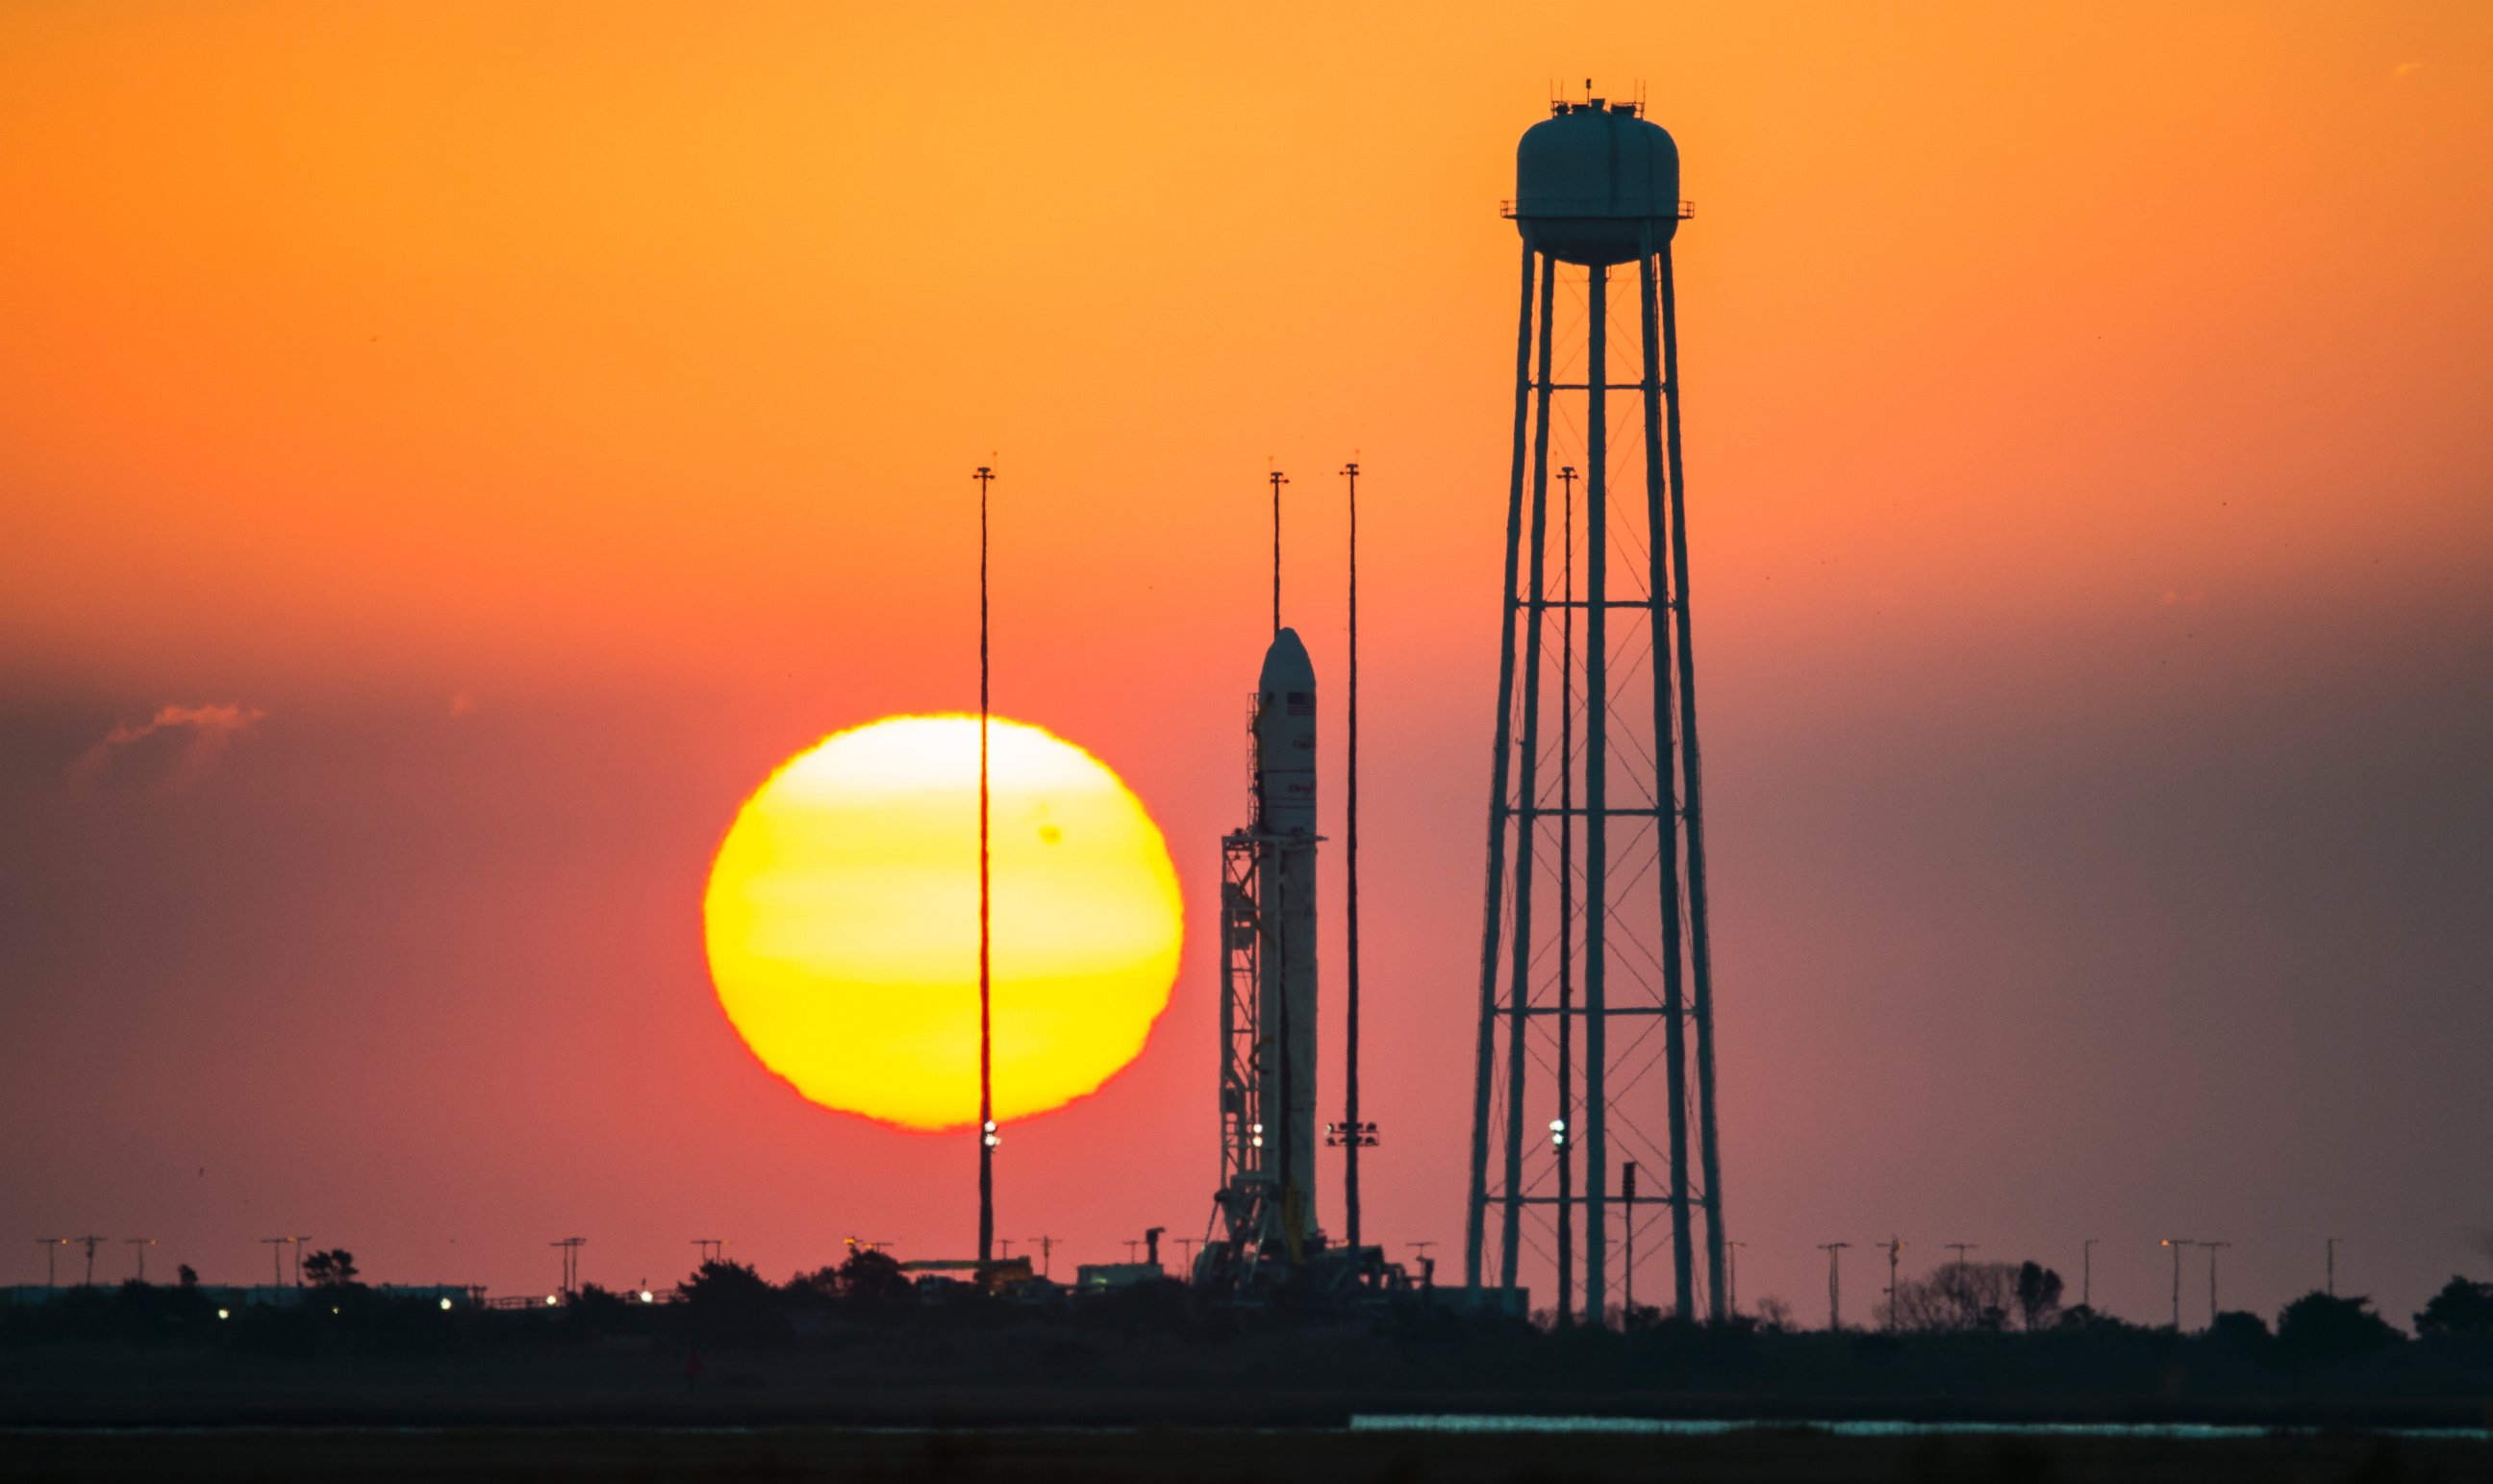 PHOTO: In this photo provided by NASA, the Orbital Sciences Corporation Antares rocket, with the Cygnus spacecraft onboard, is seen during sunrise, Oct. 26, 2014, at NASA's Wallops Flight Facility in Virginia. 